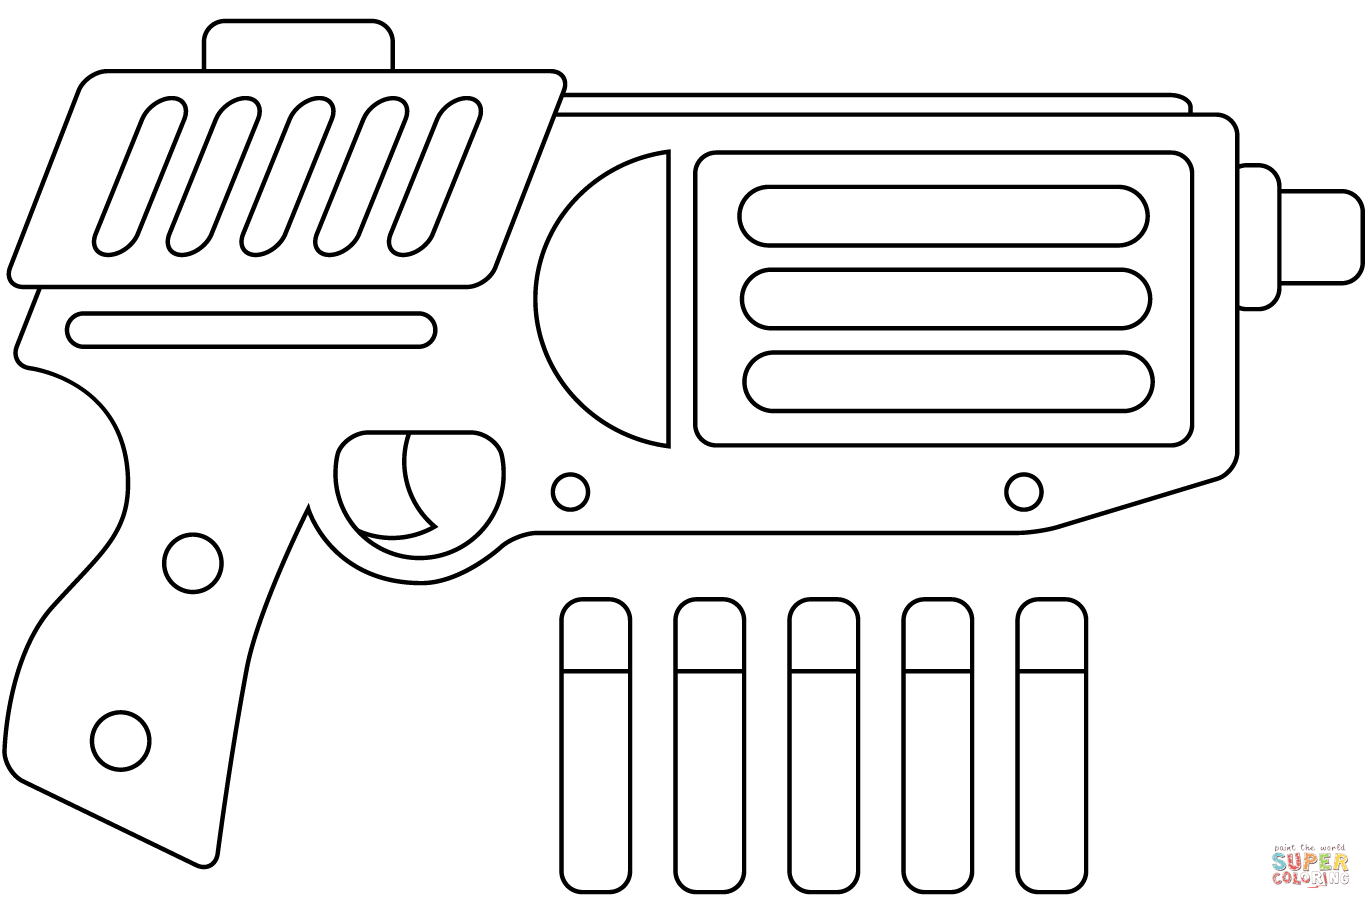 Nerf gun coloring page free printable coloring pages